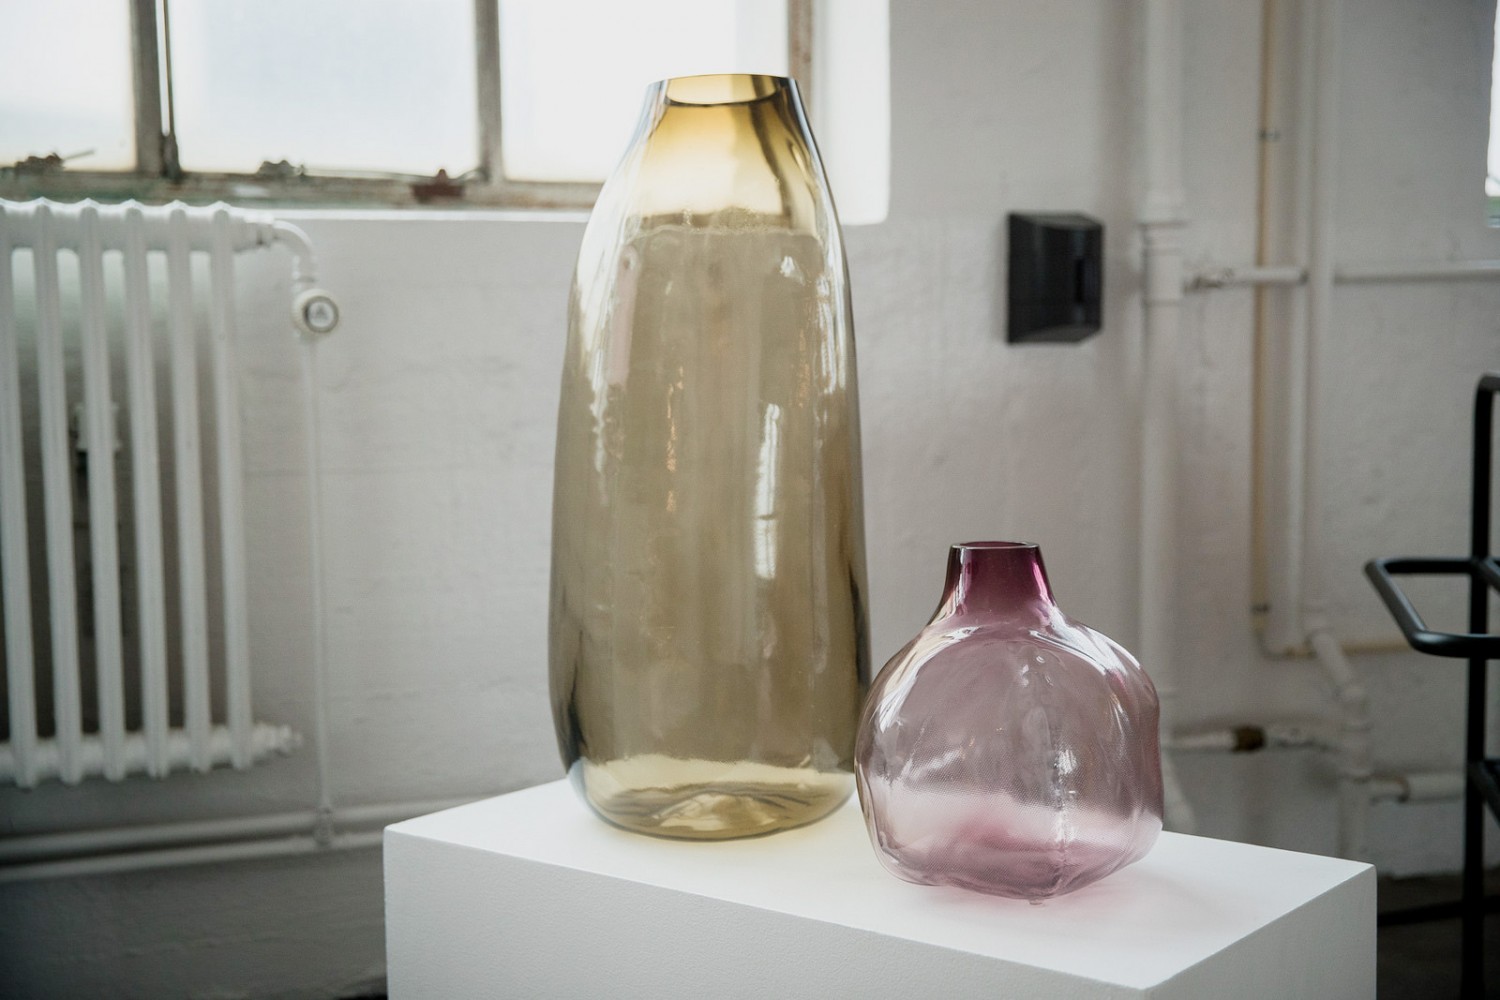 The winner was these glass vases called '105 ltr forms' designed by Fabio Vogel.